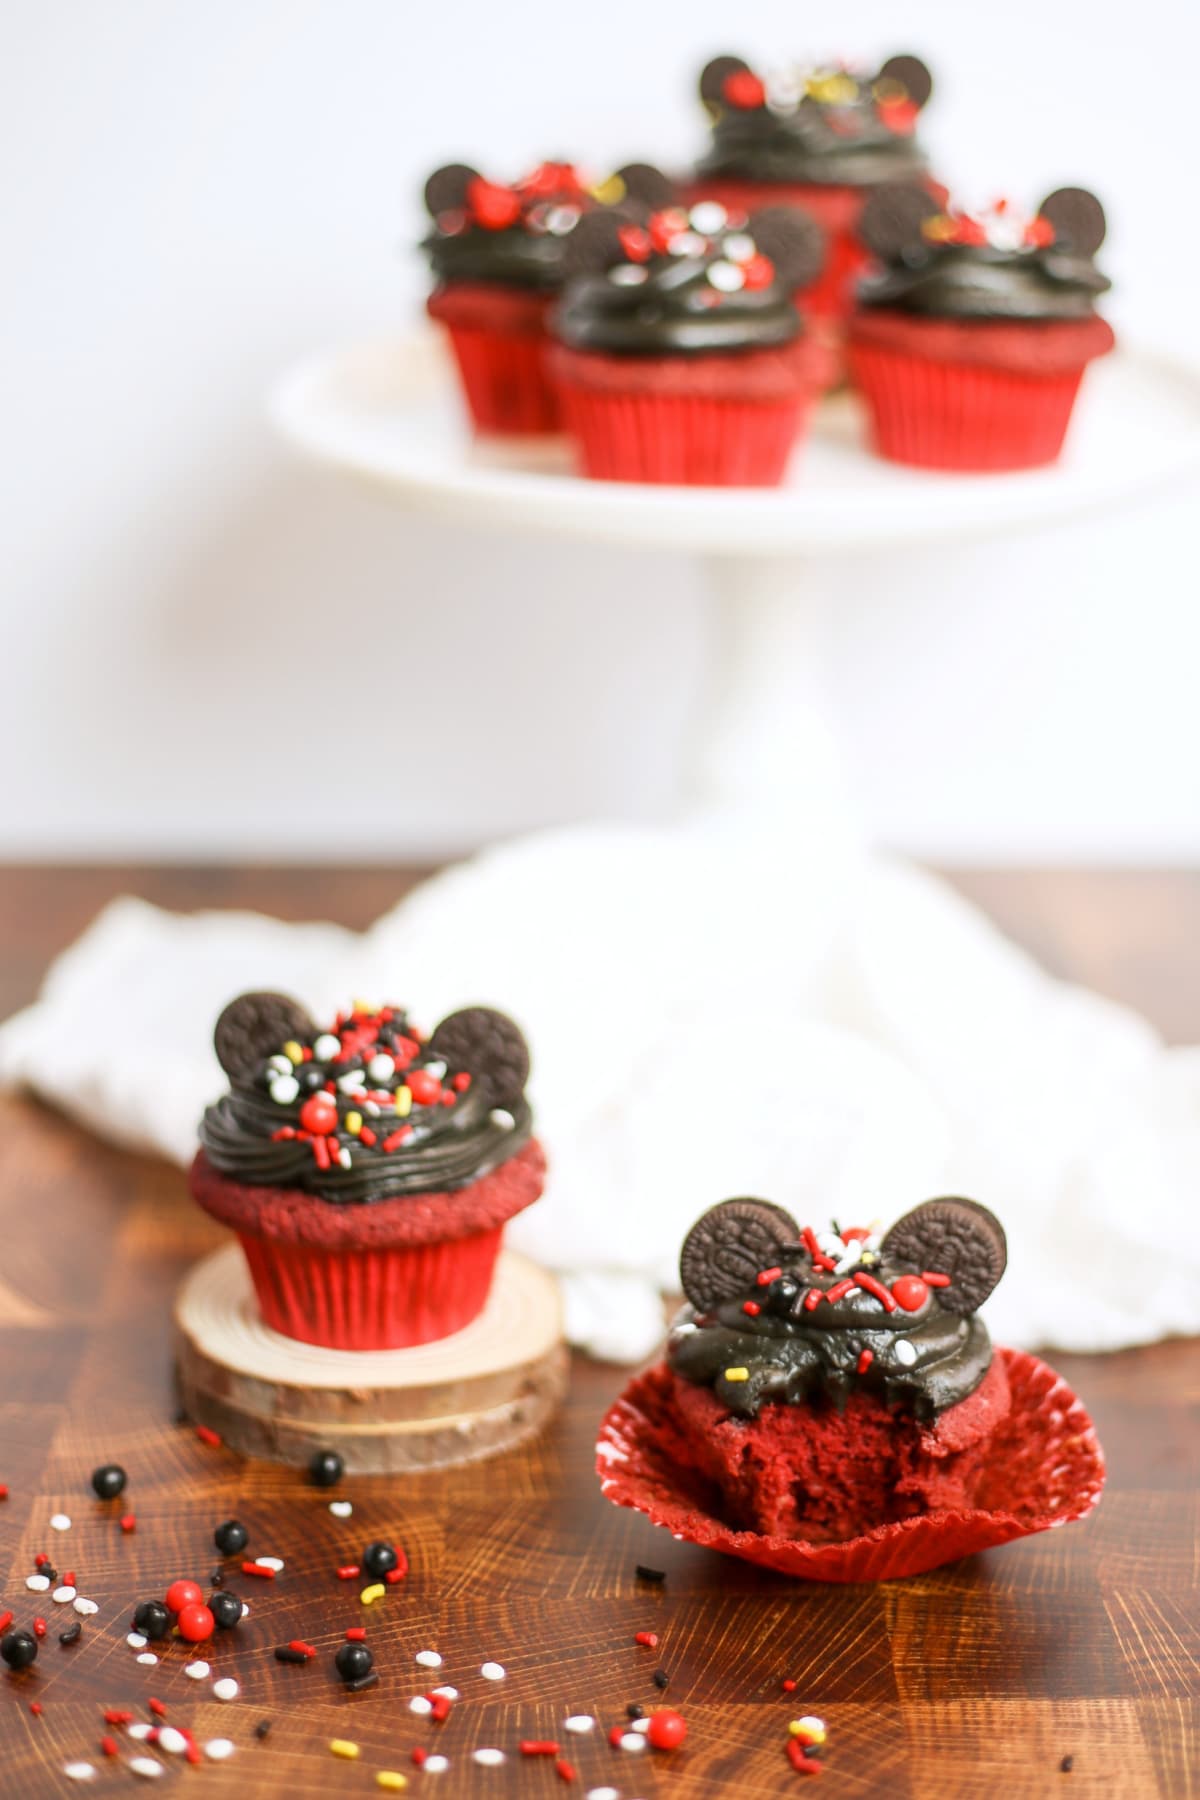 Mickey Mouse cupcakes, one with a bite taken out